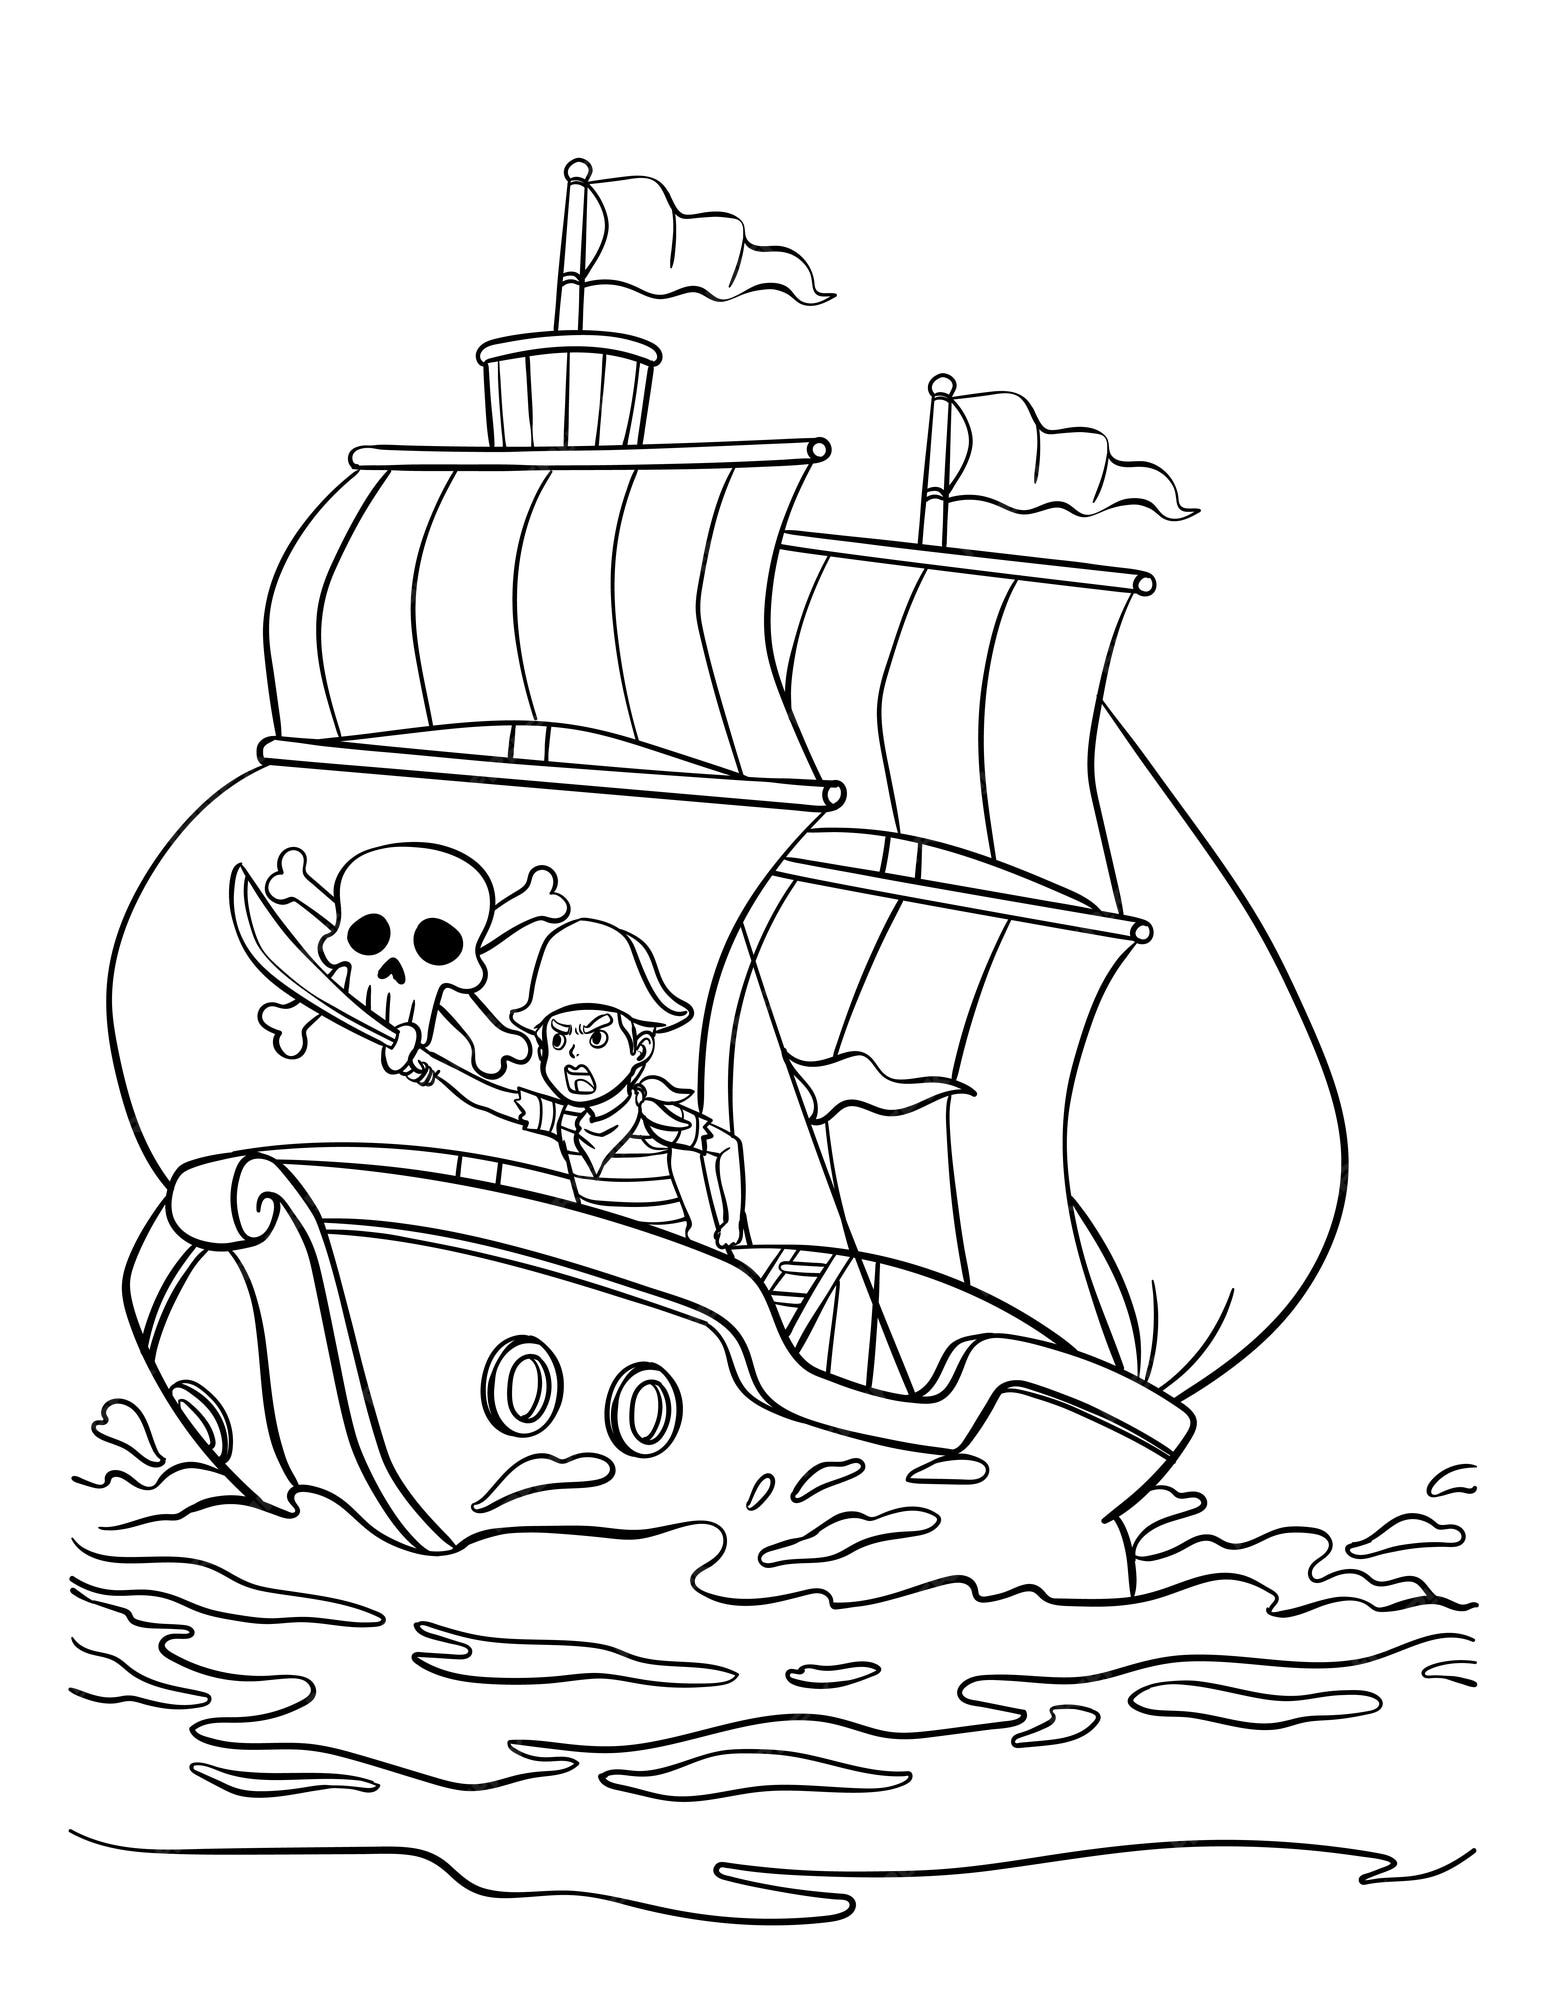 Premium vector pirate ship isolated coloring page for kids